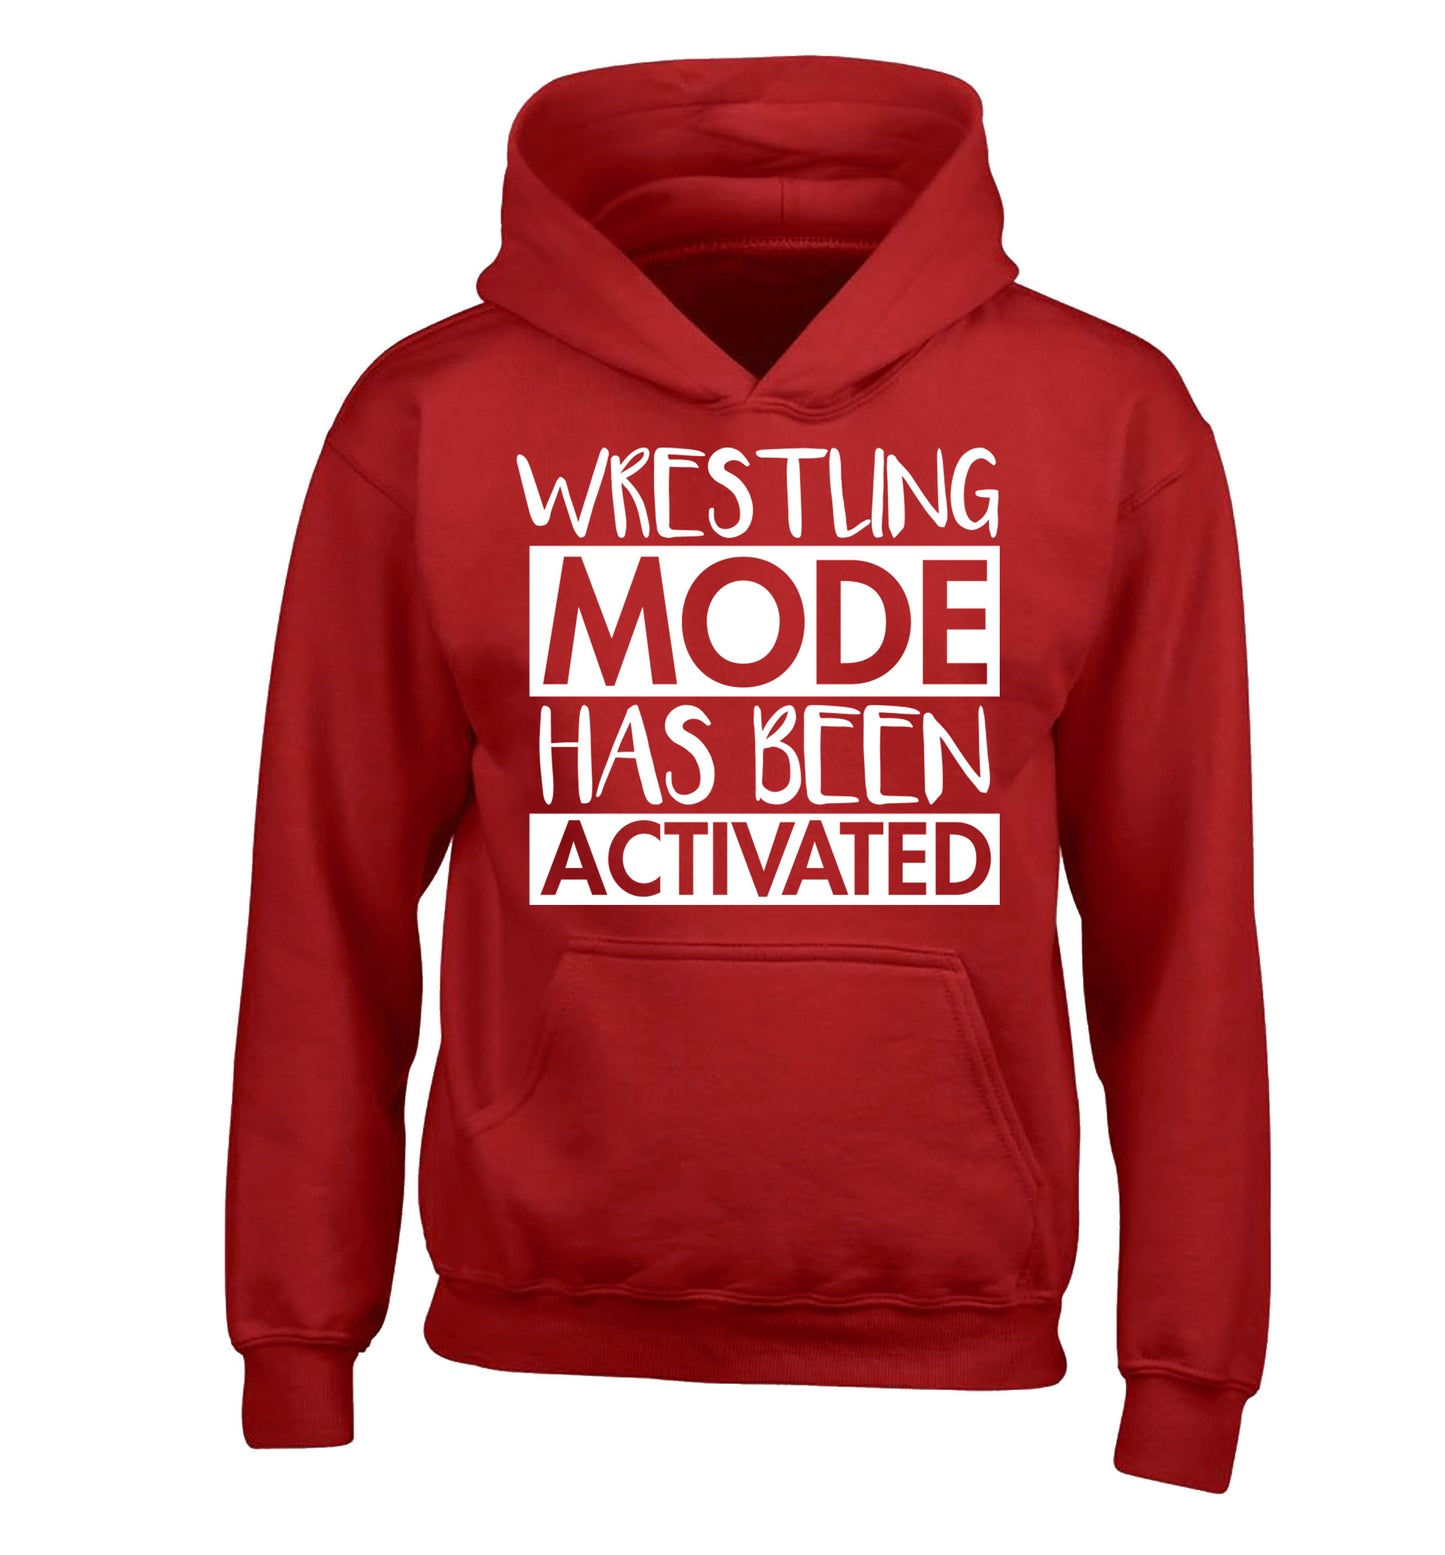 Wresting mode activated children's red hoodie 12-14 Years